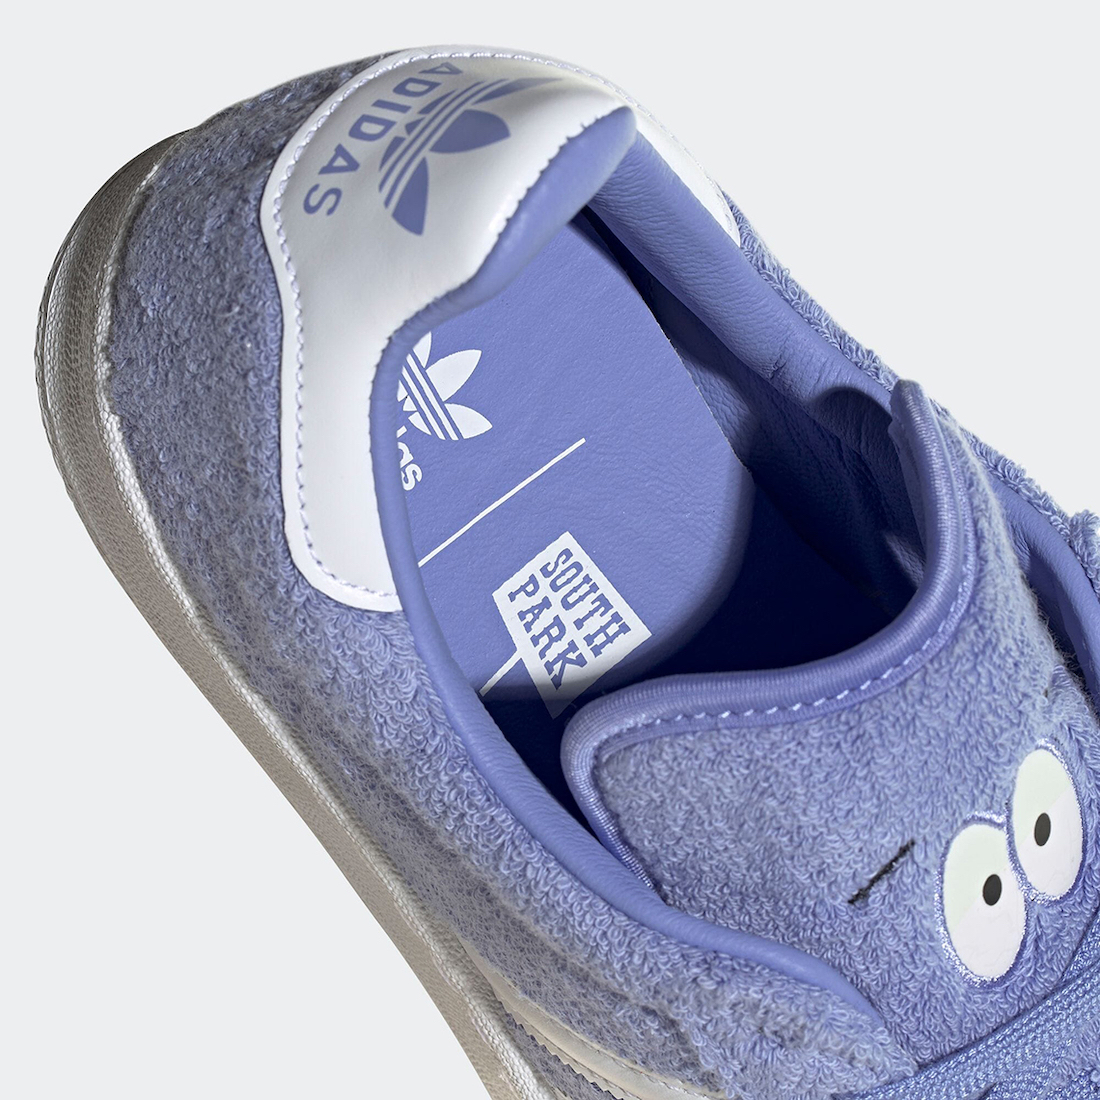 South-Park-adidas-Campus-80s-Towelie-GZ9177-Release-Date-8